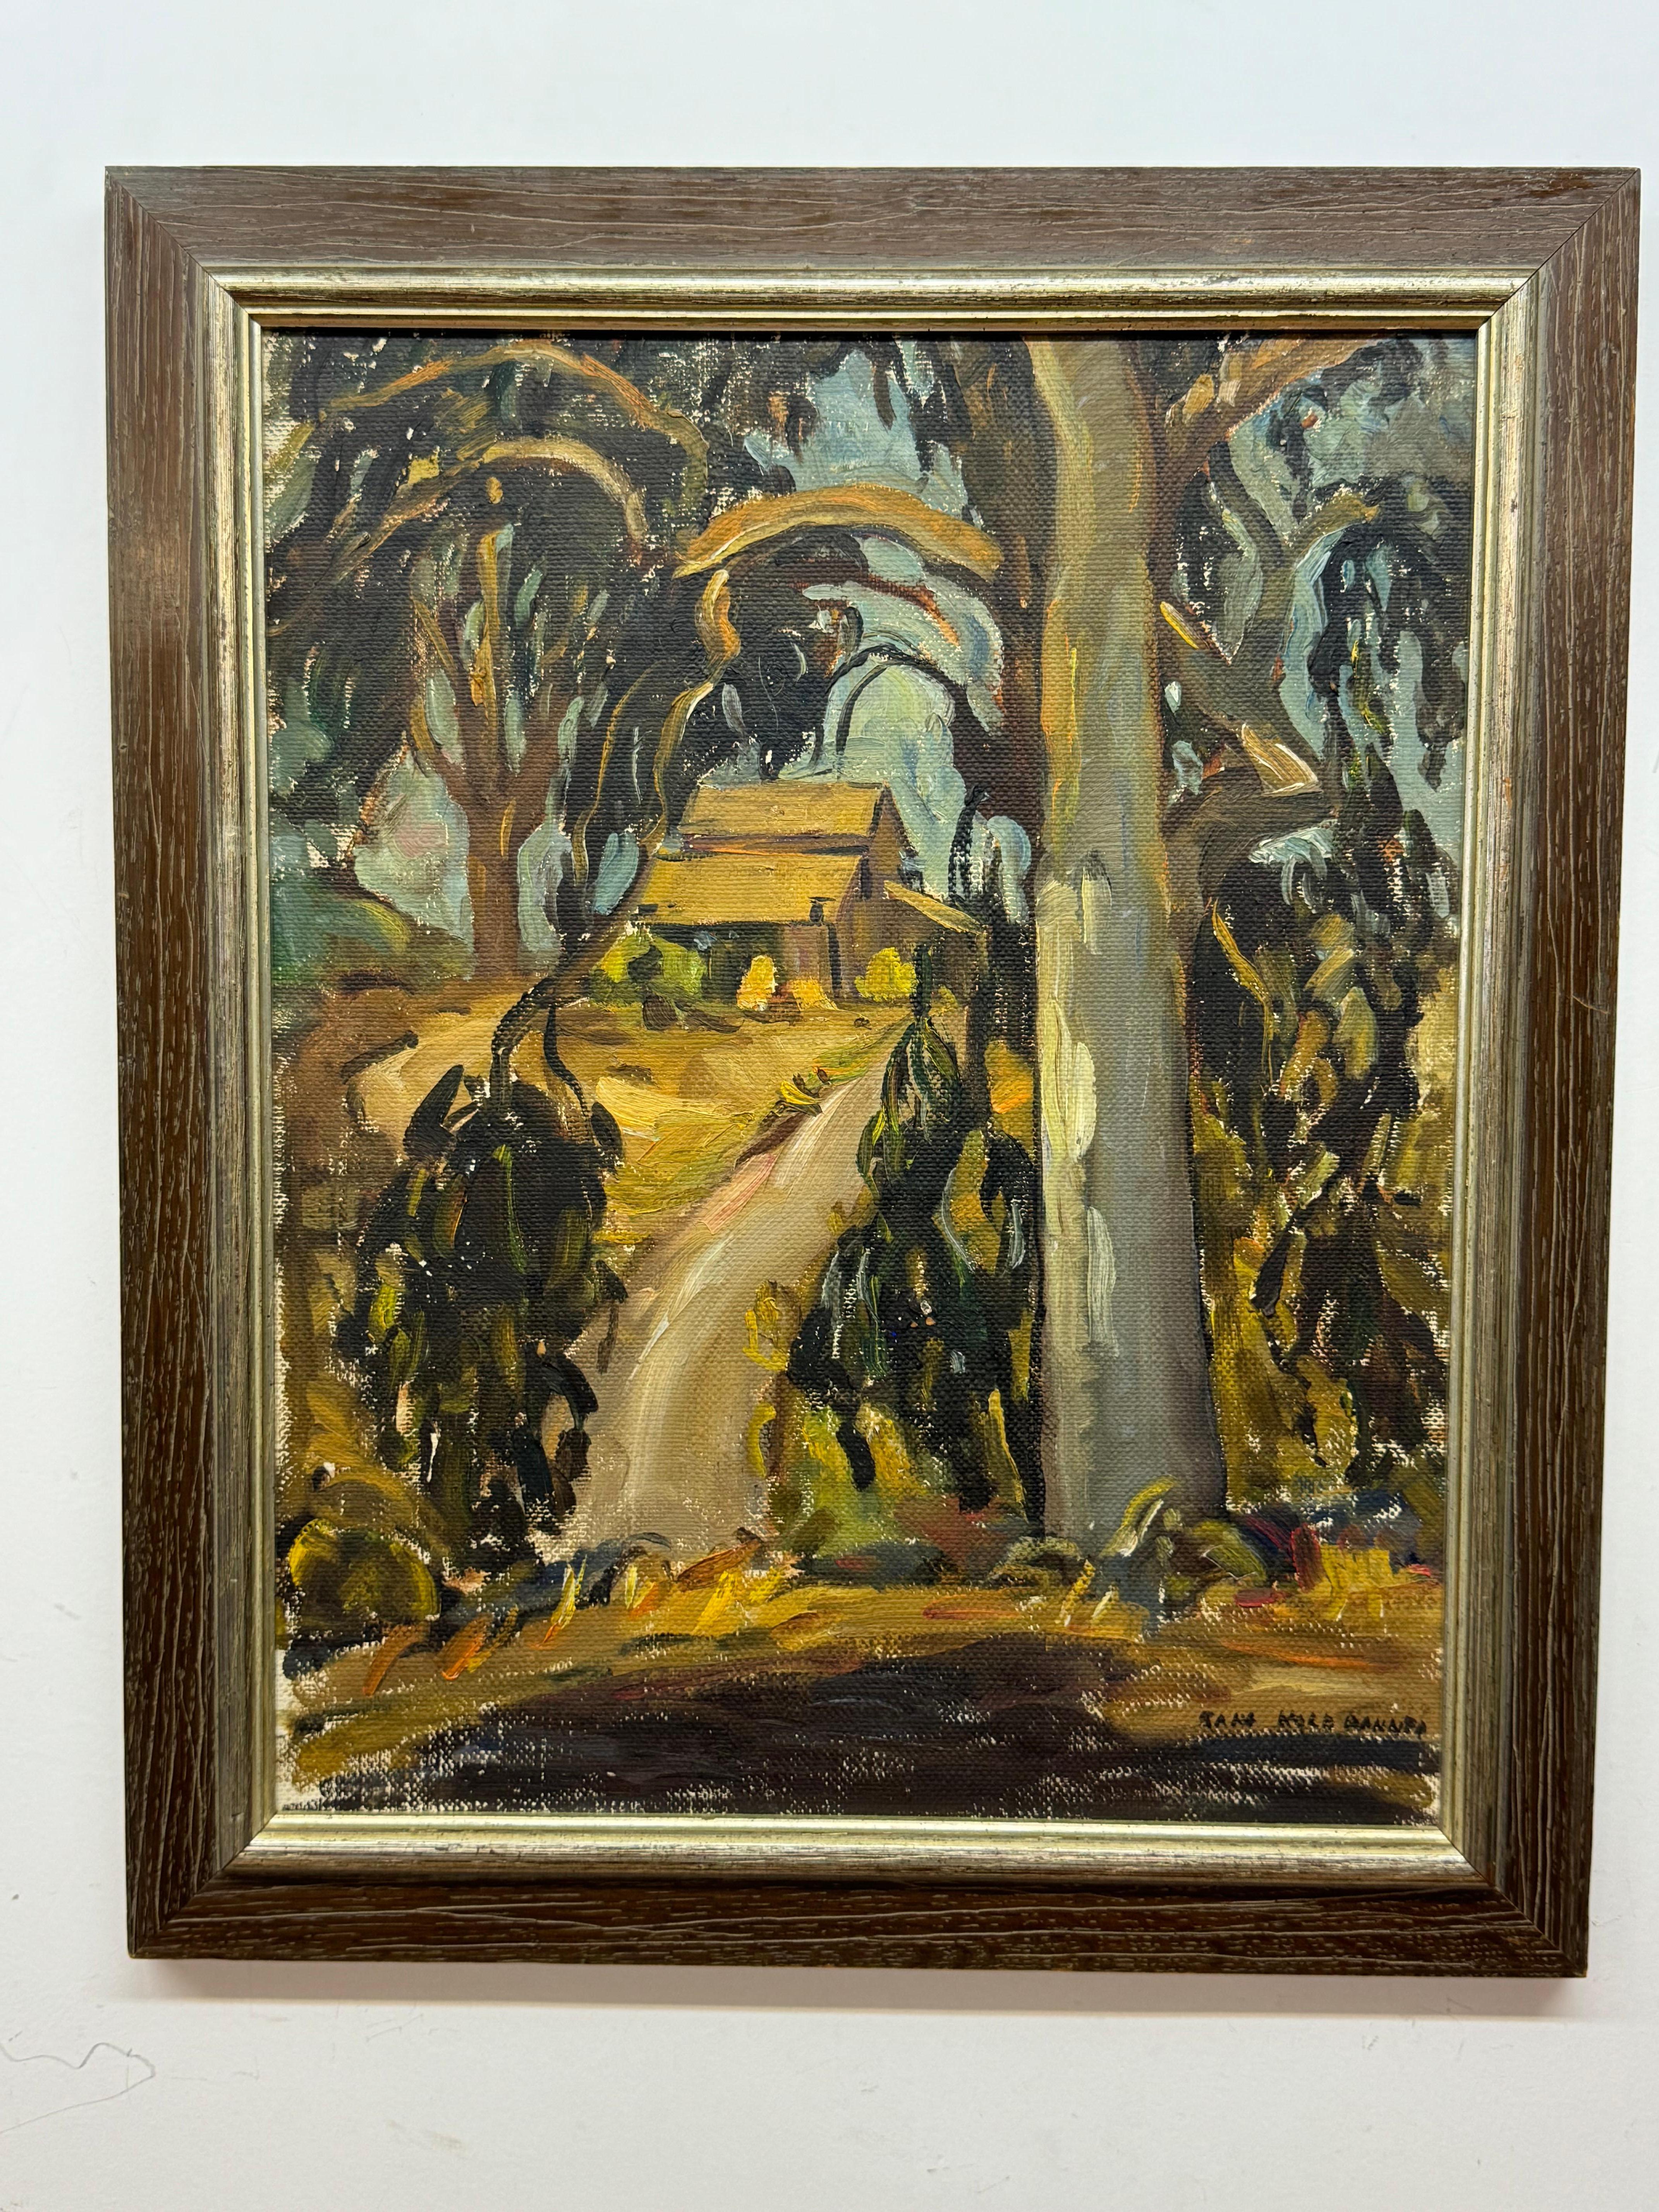 Sara Kolb Danner (American, 1894-1969) landscape with path leading to house

Oil on masonite

16 x 20 unframed, 19.5 x 23.5 framed